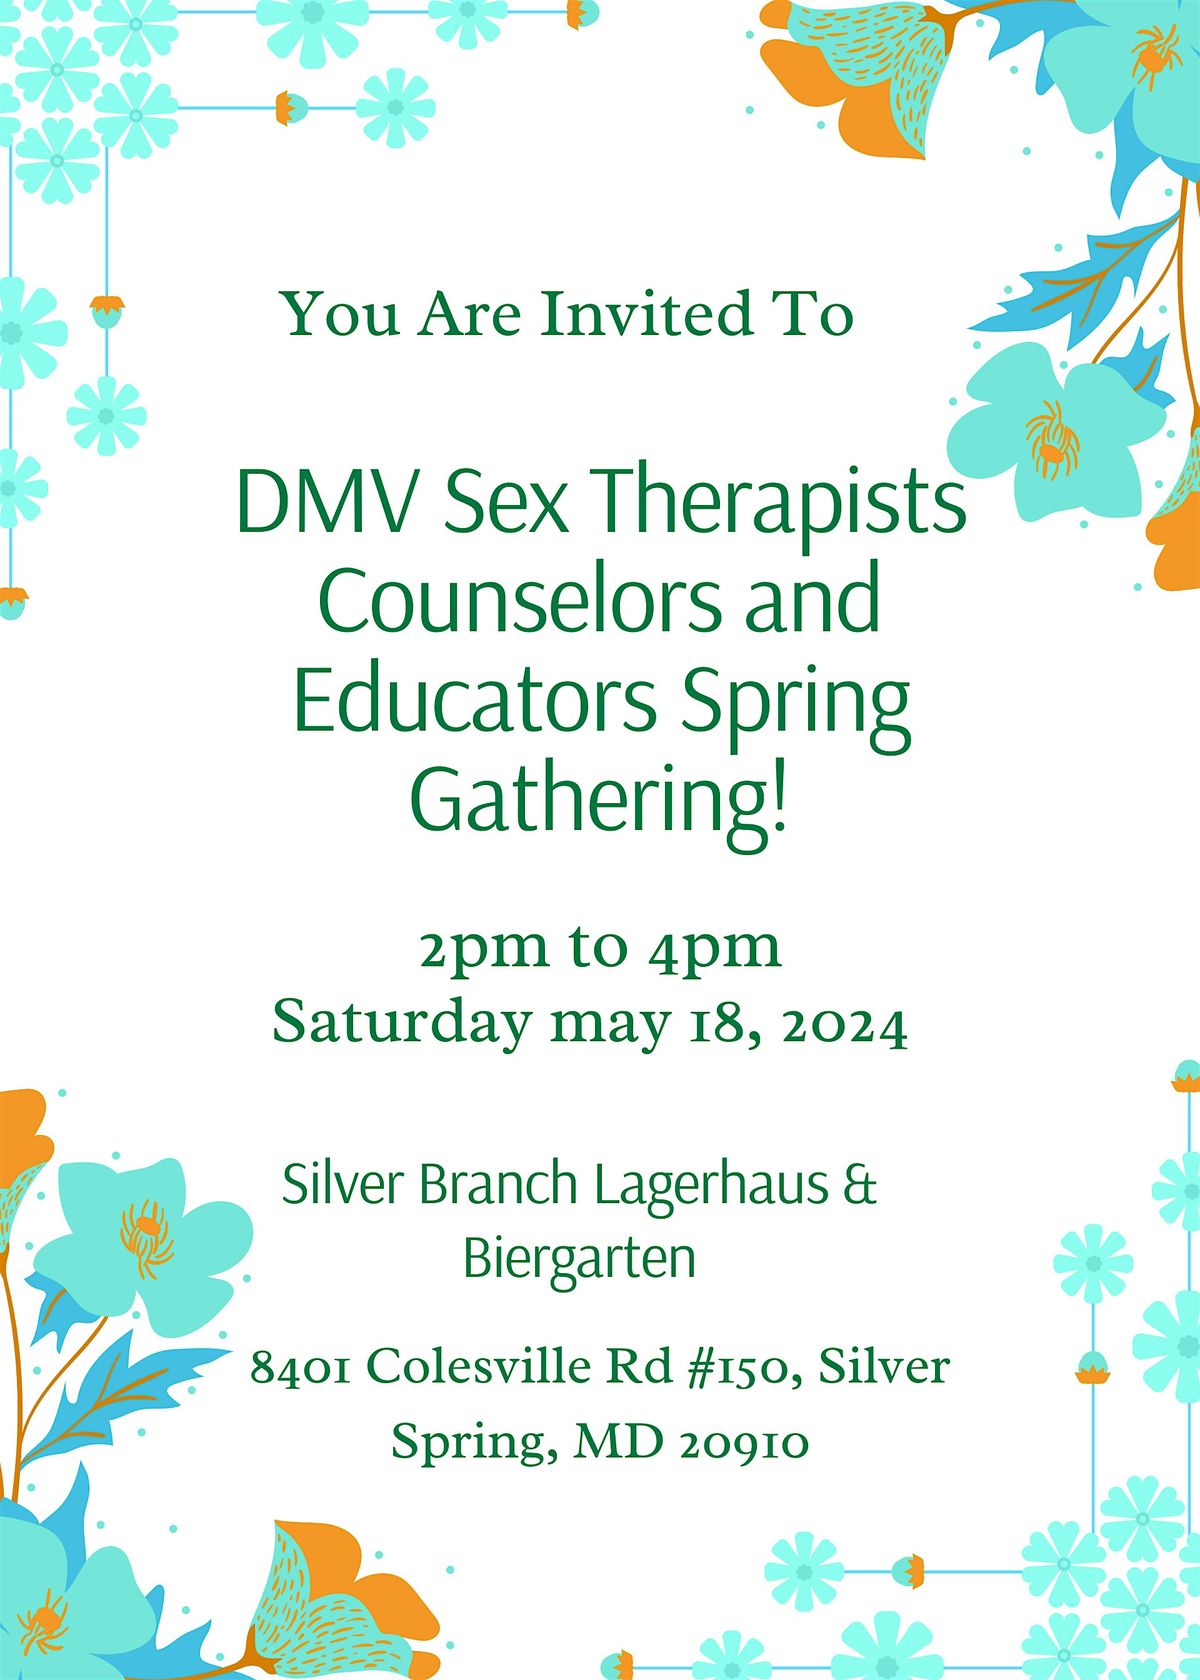 DMV Area Sex Therapist, Counselors and Educators Spring Gathering